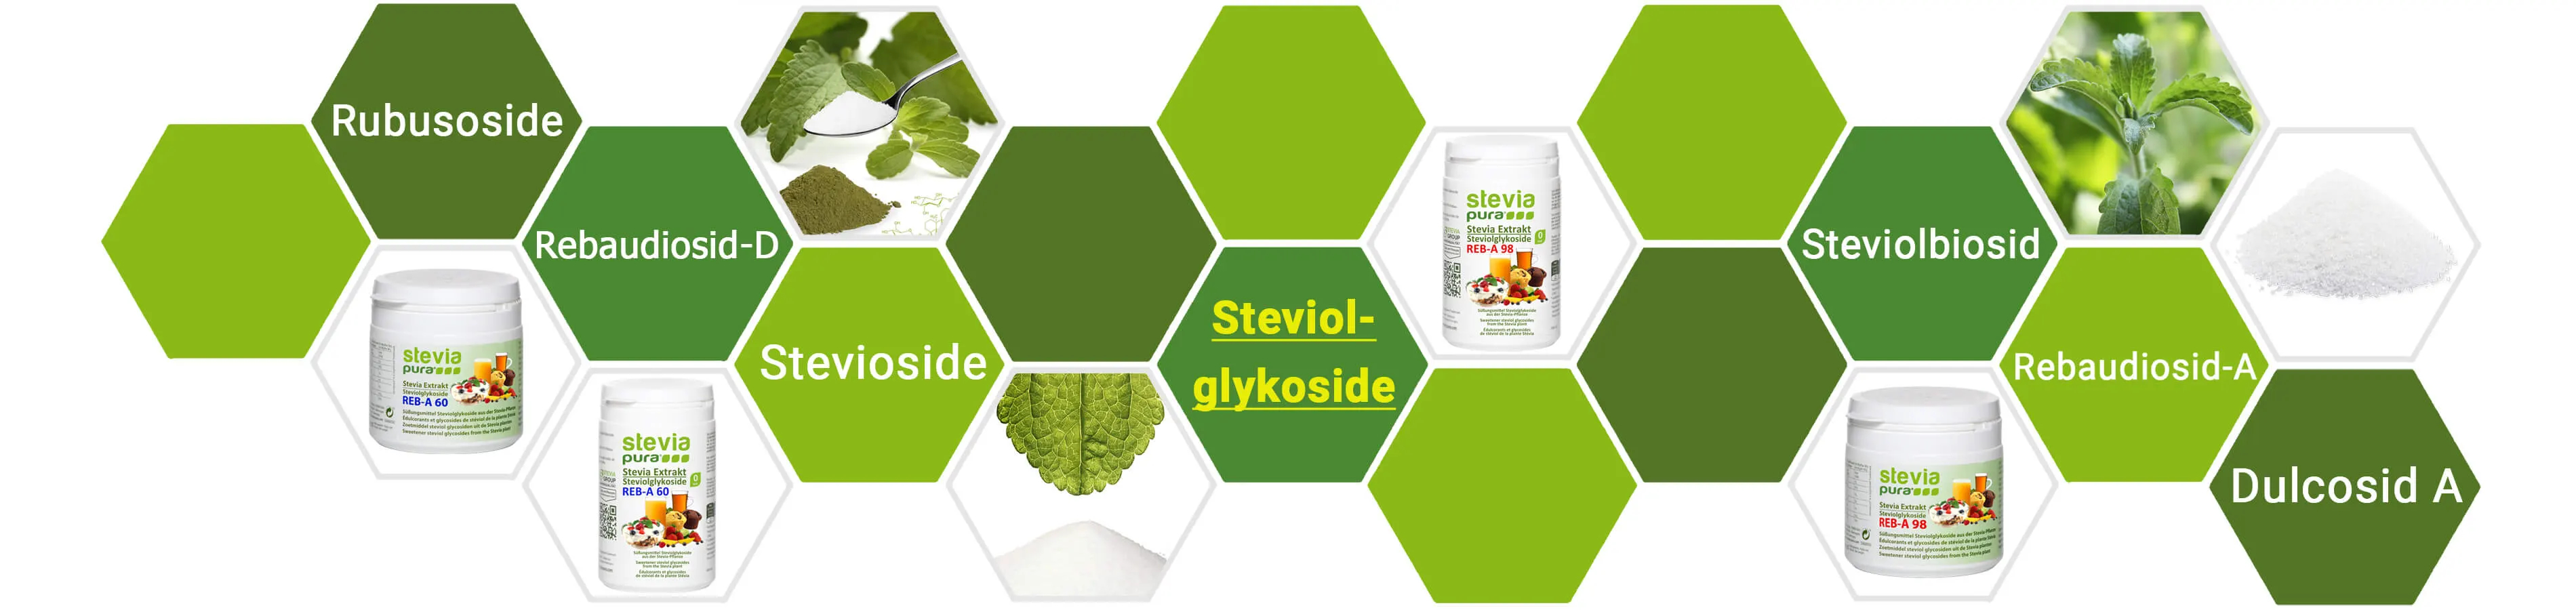 What are Steviol Glycosides? | The sugar substitute...